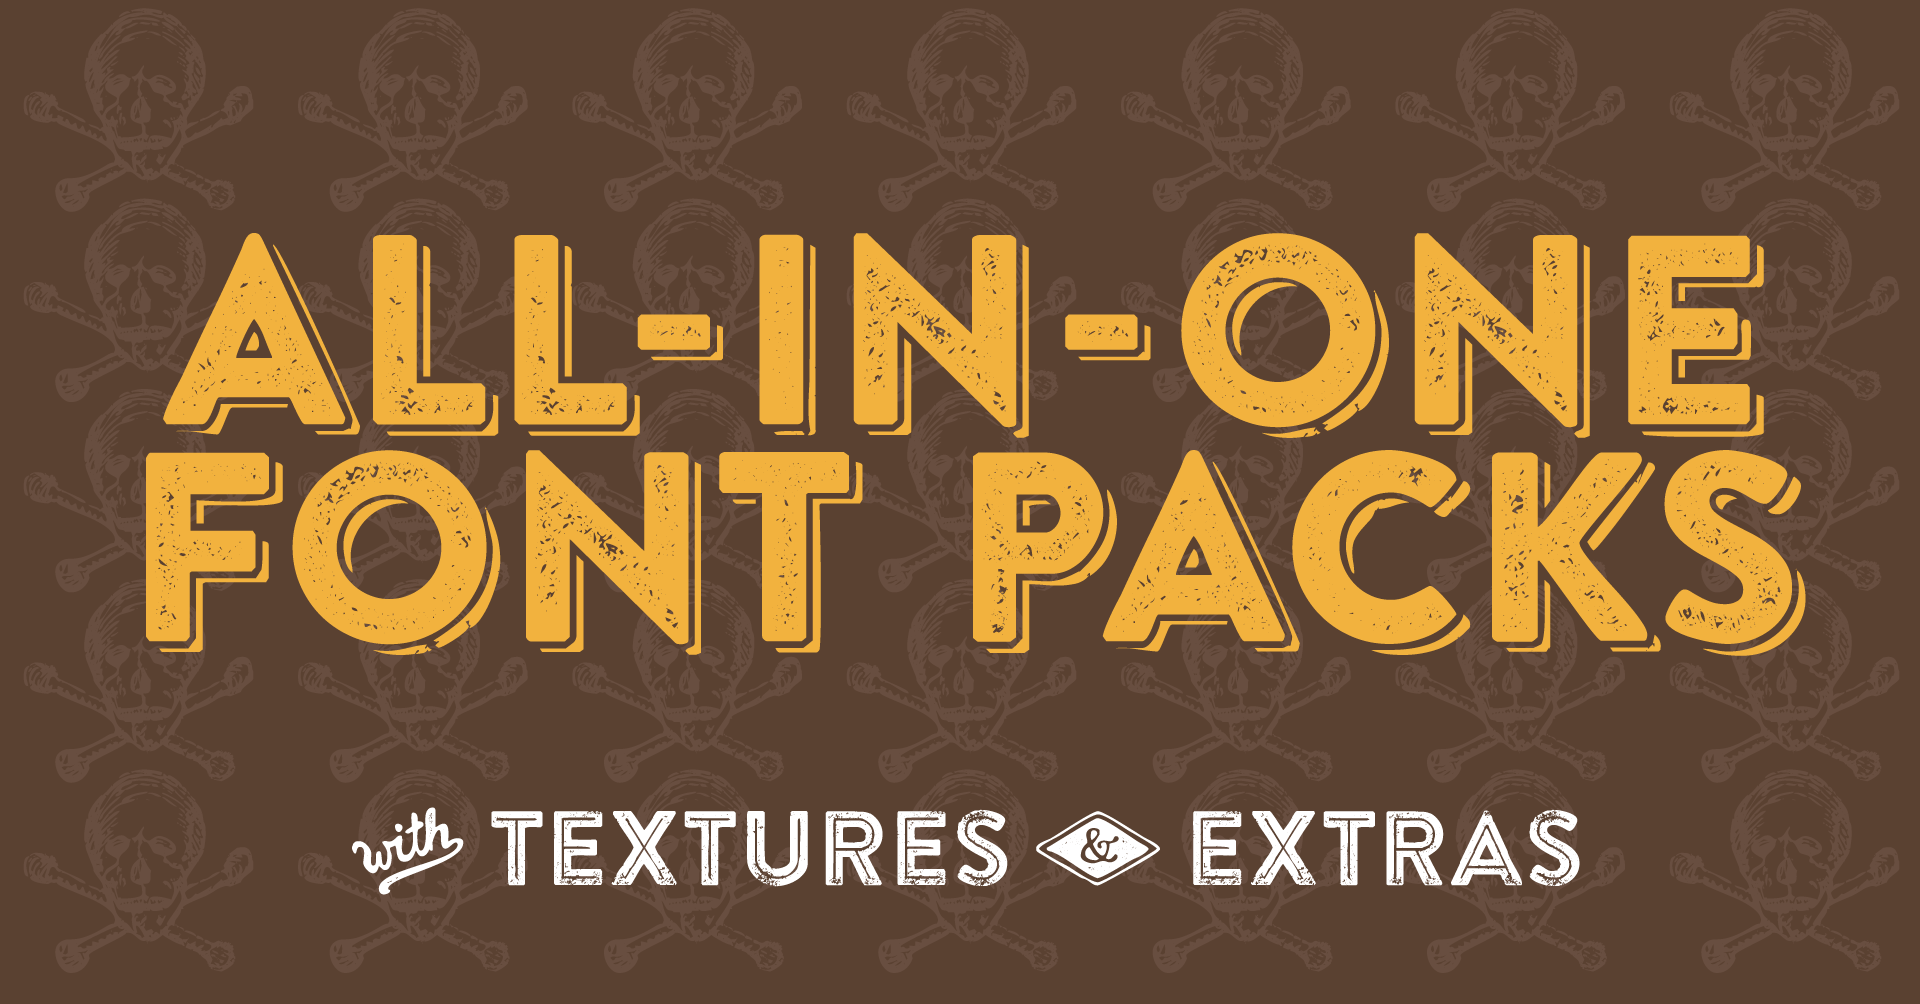 Trend Report: All-In-One Pack